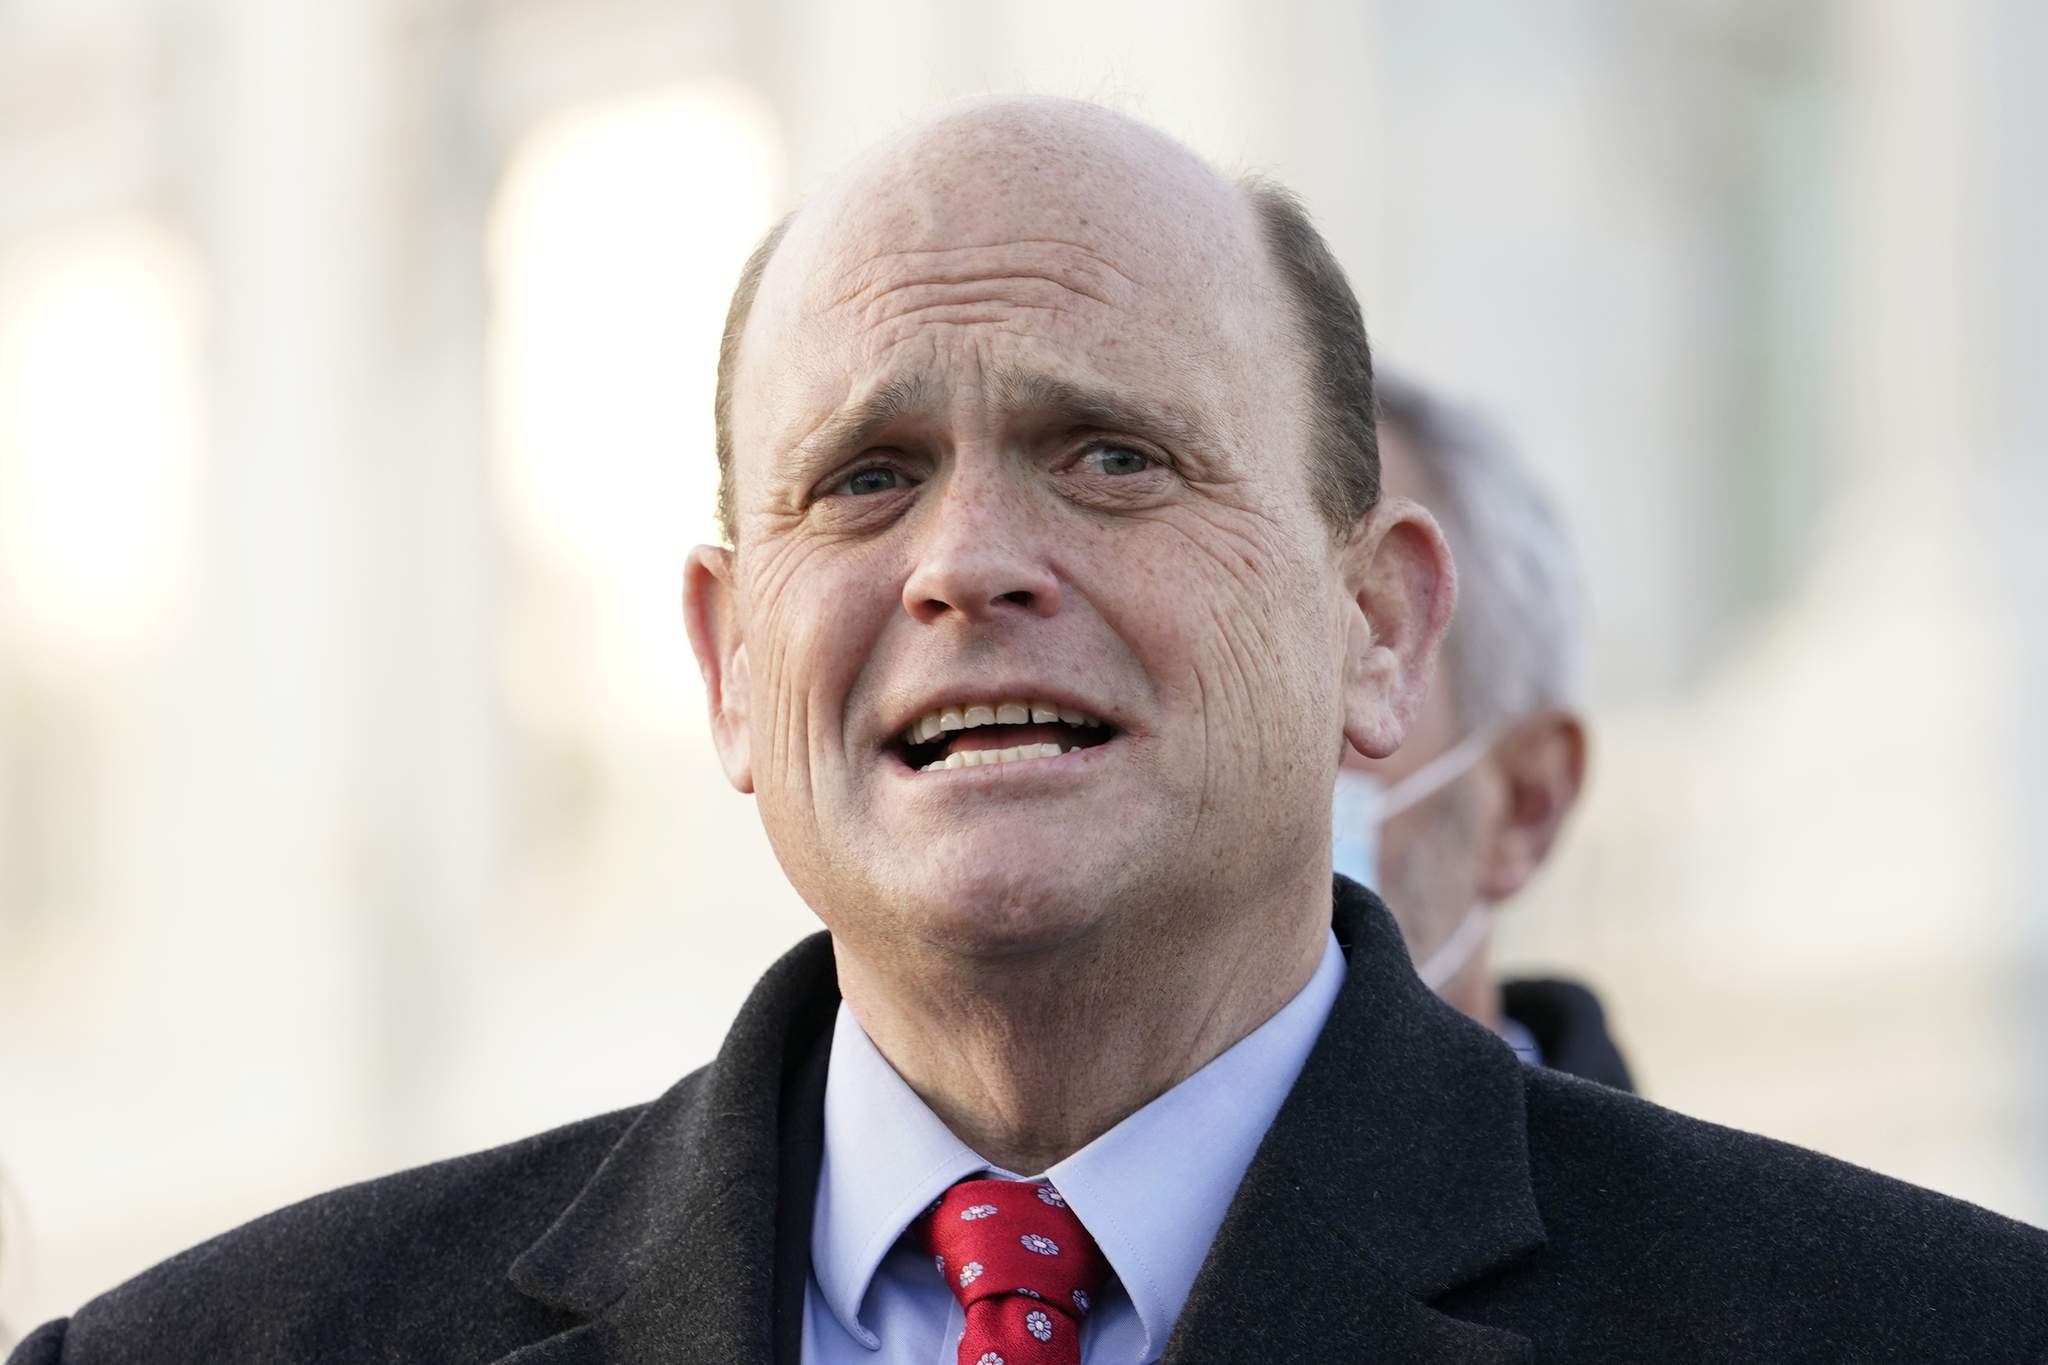 ‘Sorry’: GOP US Rep. Tom Reed retiring amid misconduct claim